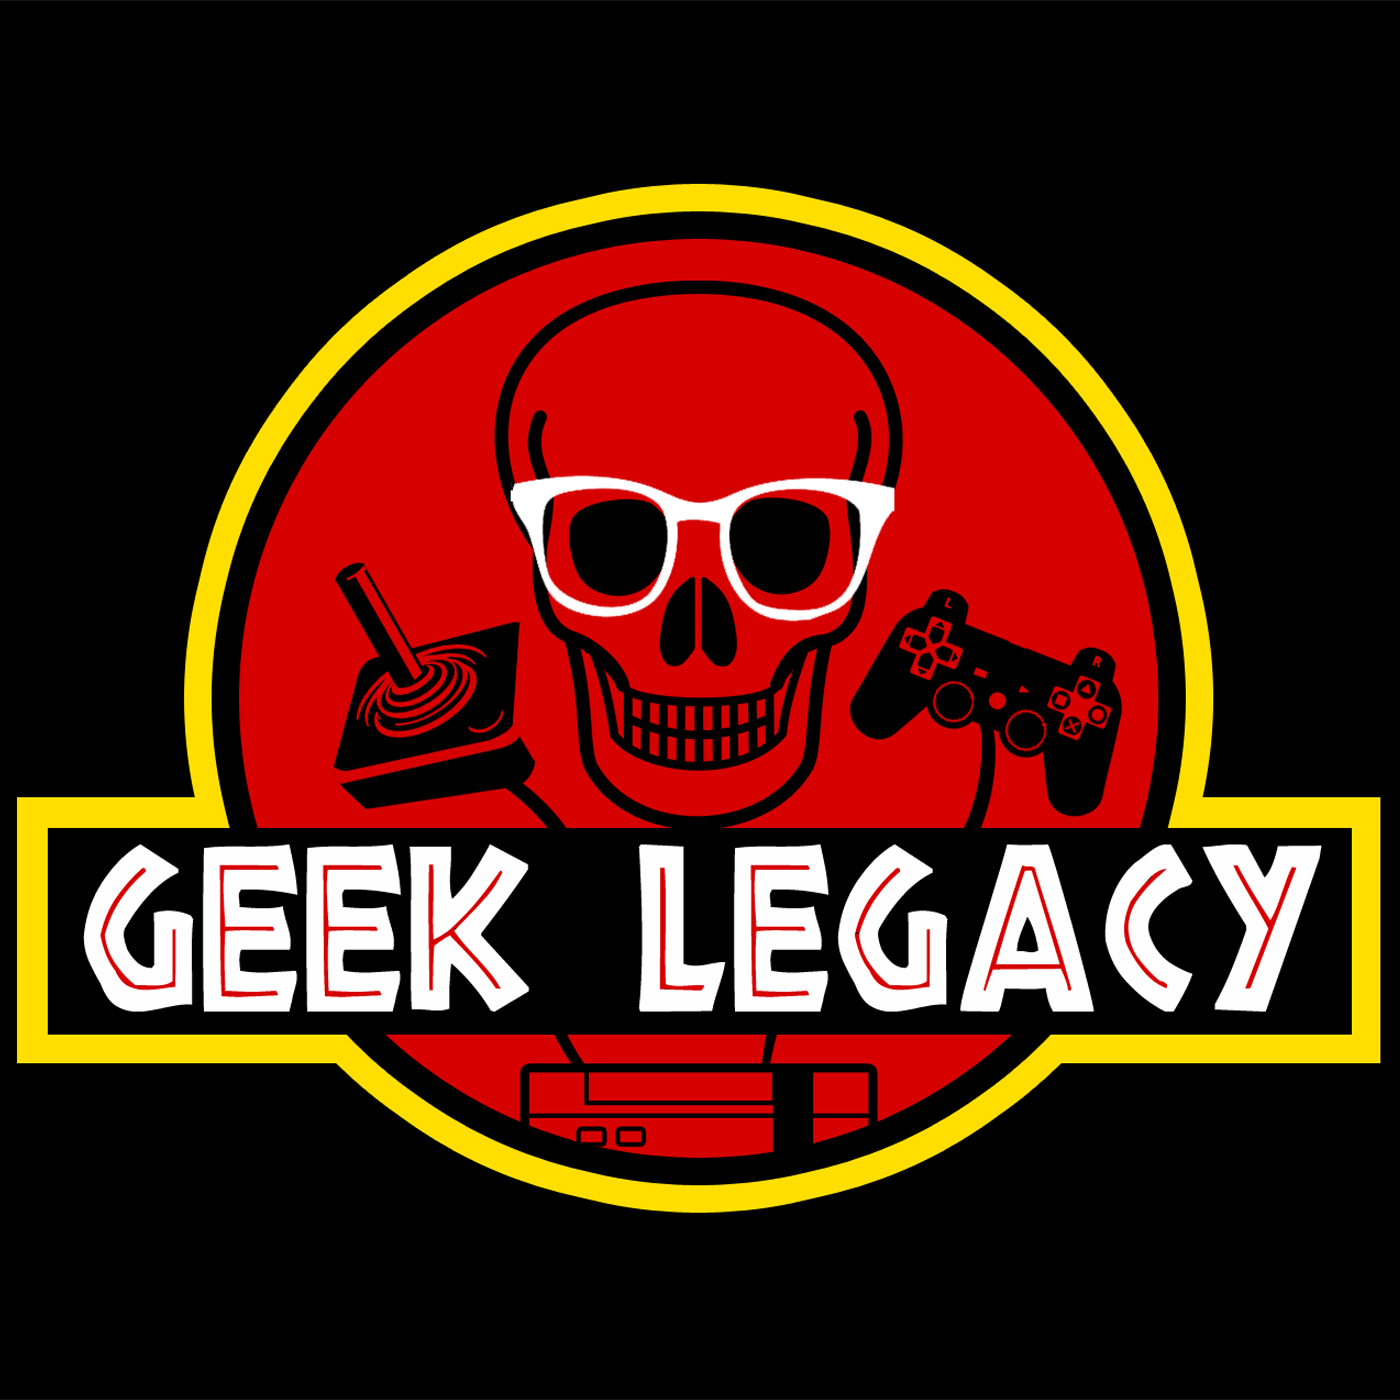 Geek Legacy Podcast: Episode 251 - Black Panther Shakes Things Up